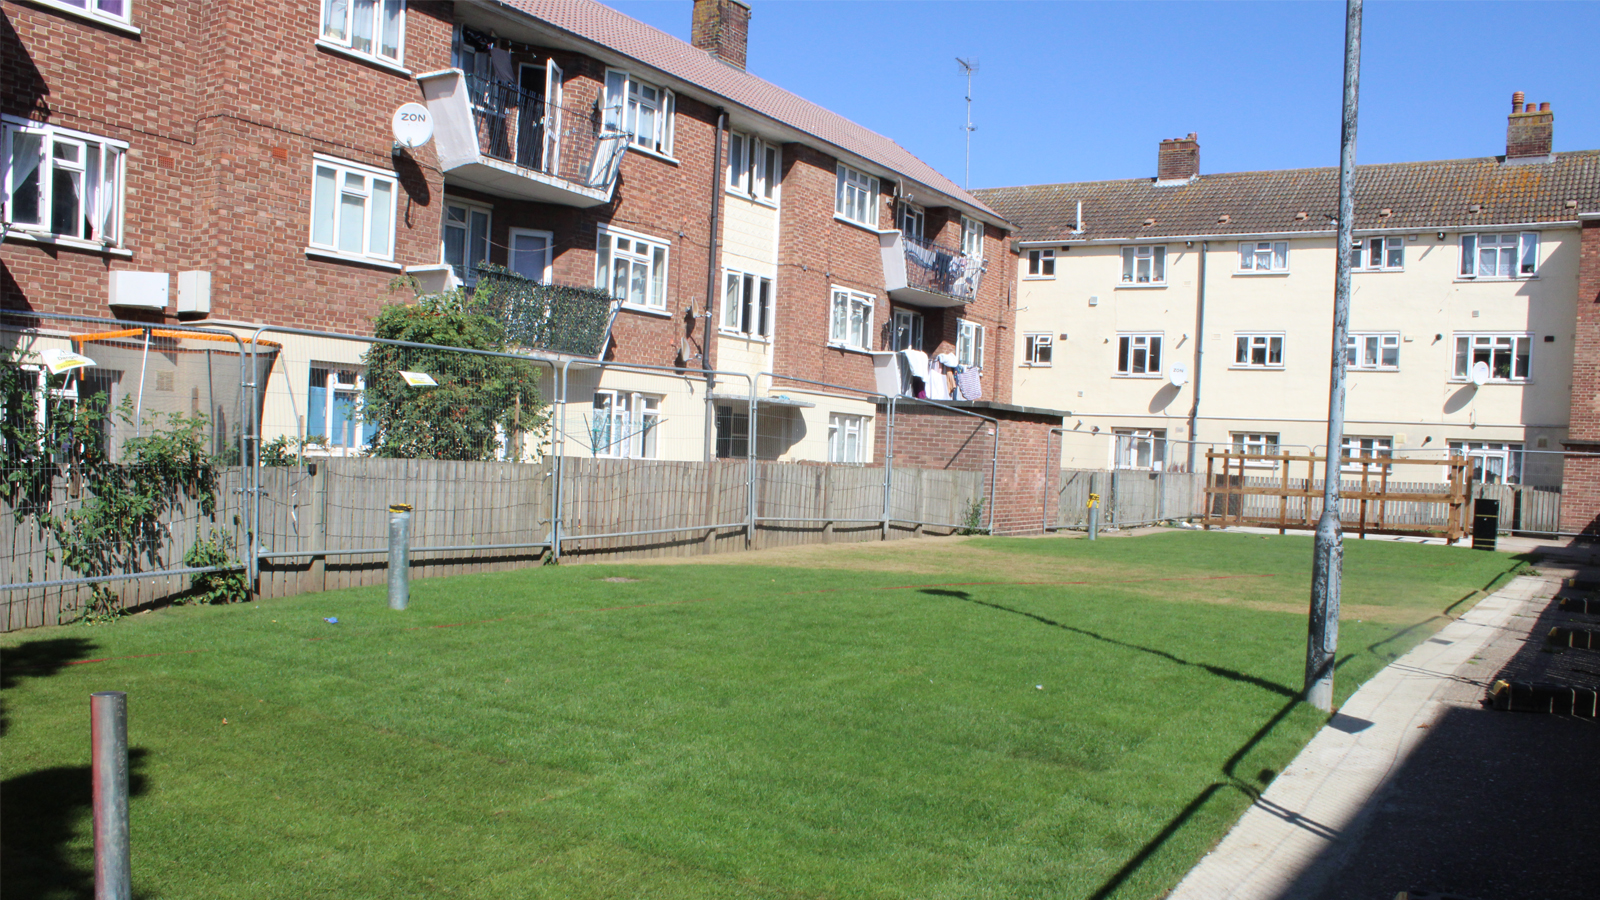 Partially finished new play areas surrounded by housing estate